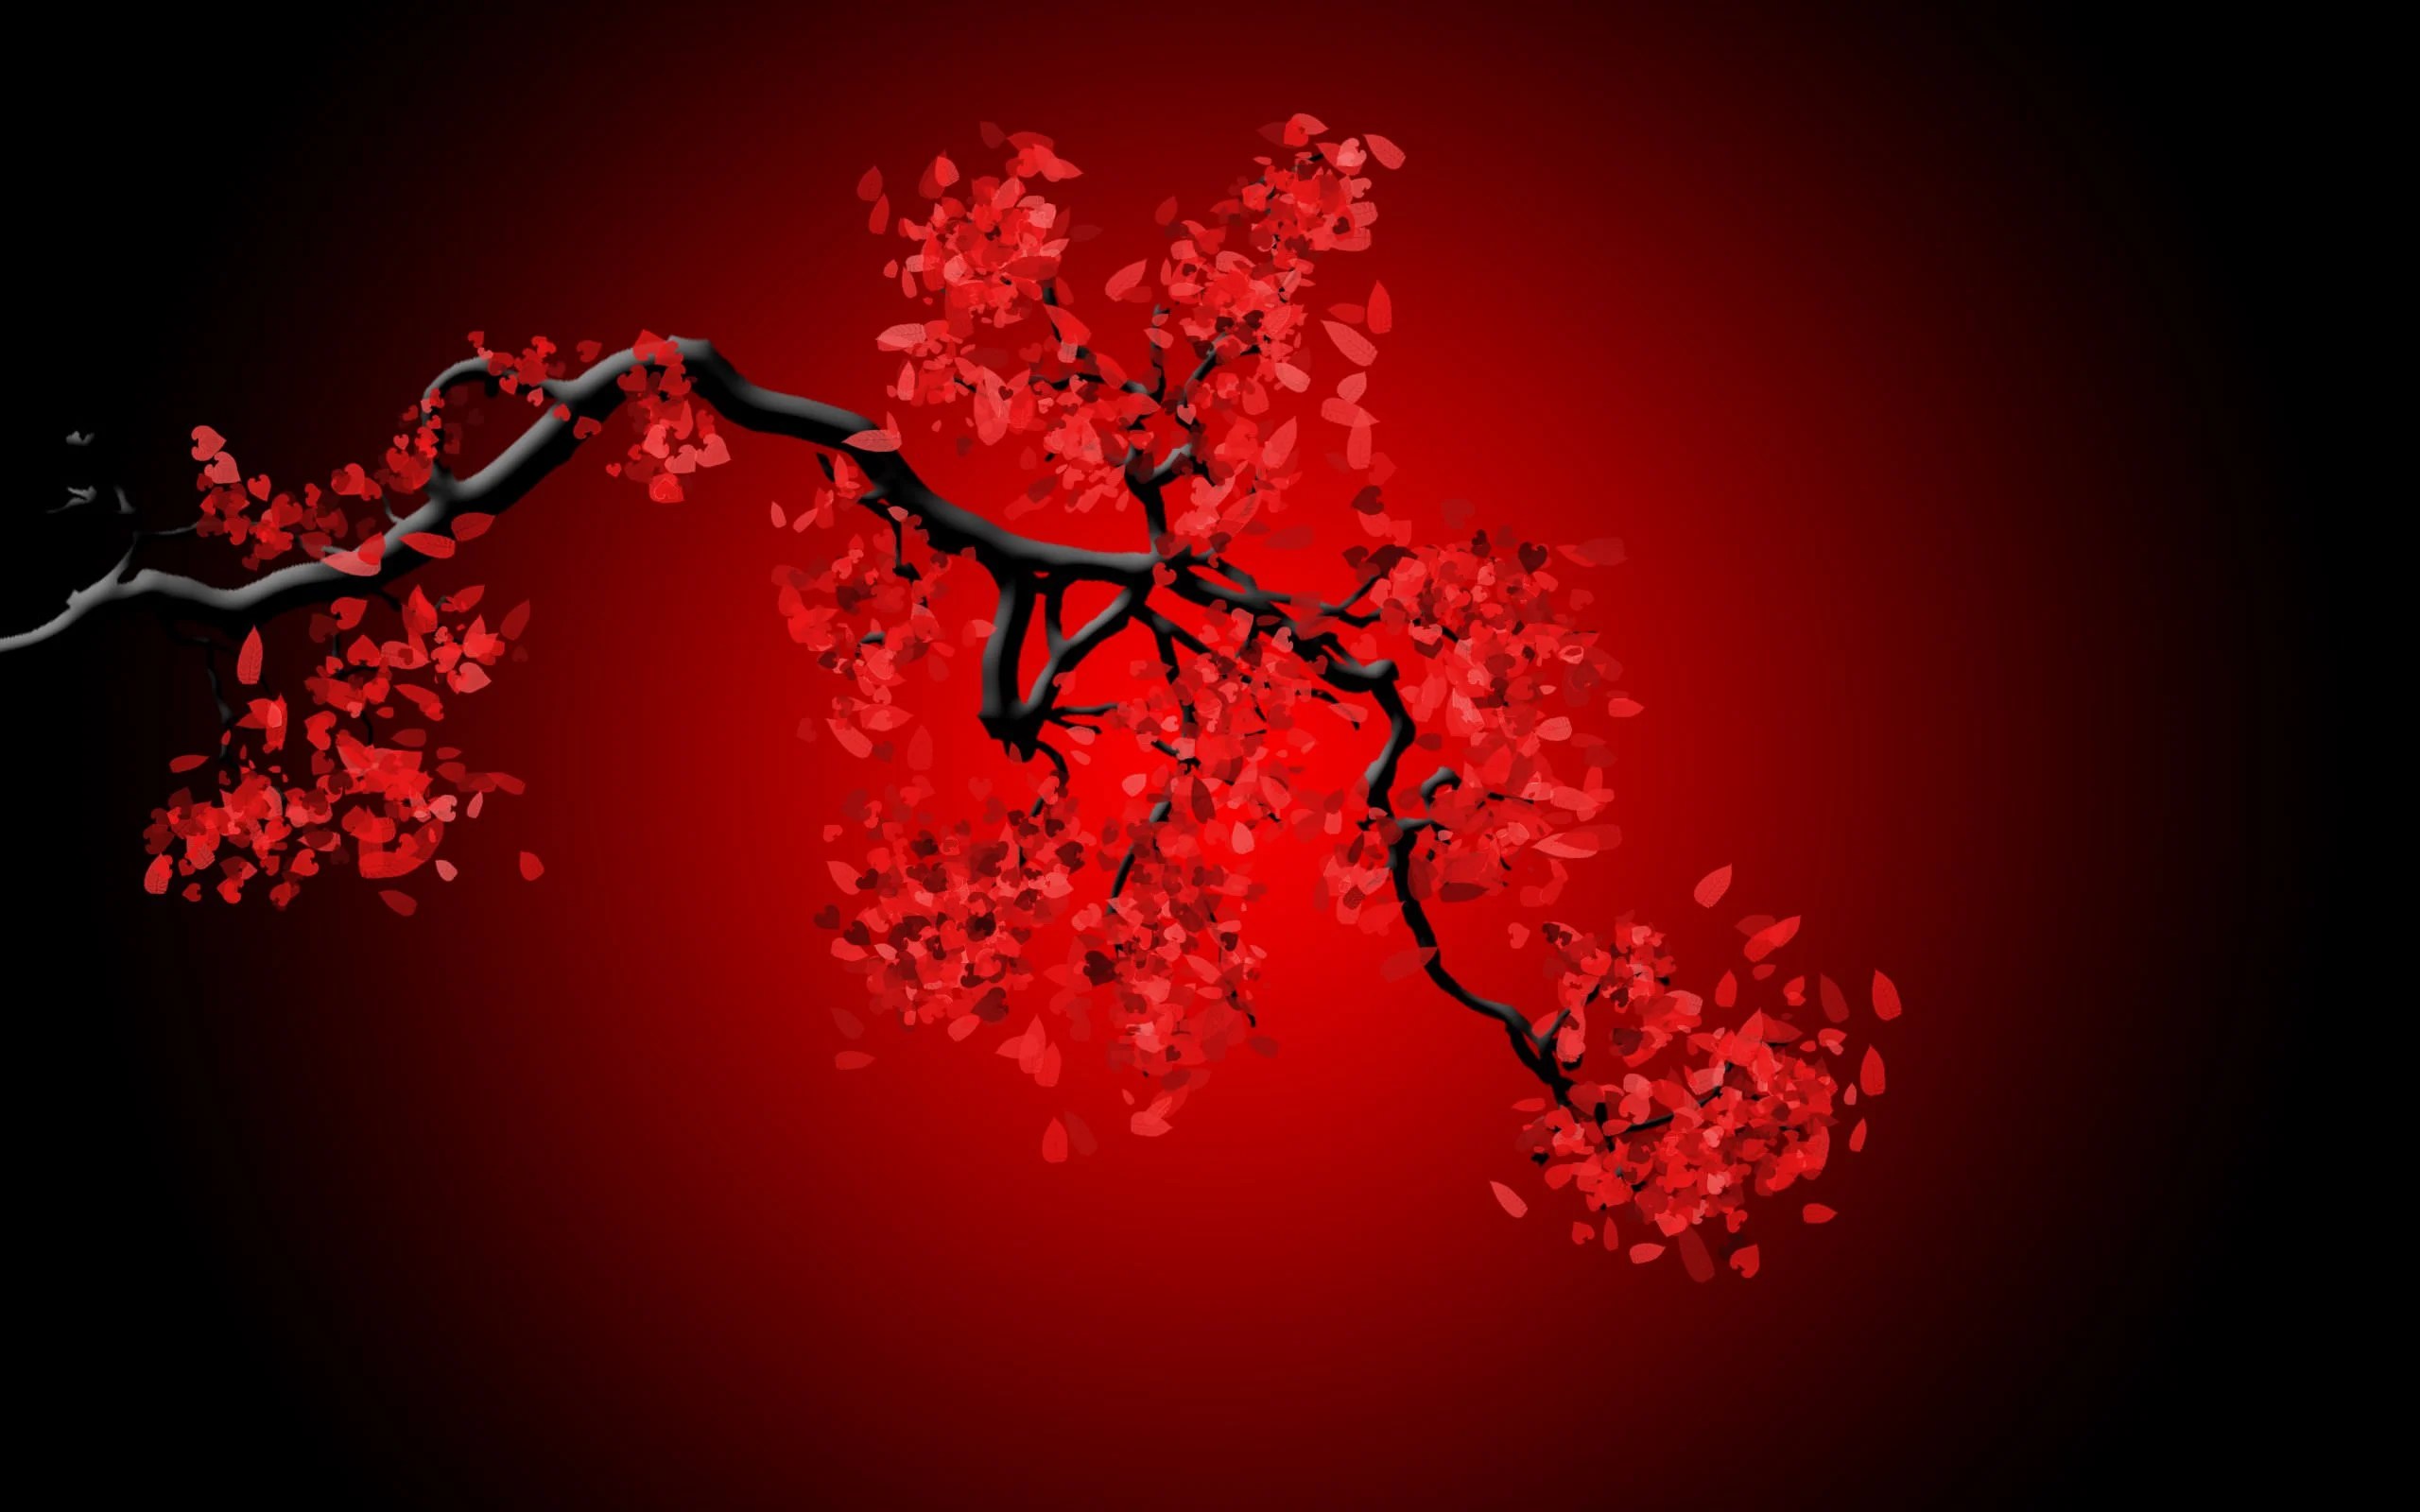 Red Japanese Aesthetic Wallpaper Pc / Desktop Wallpaper Japan Aesthetic / Free download collection of aesthetic wallpaper for your desktop and mobile